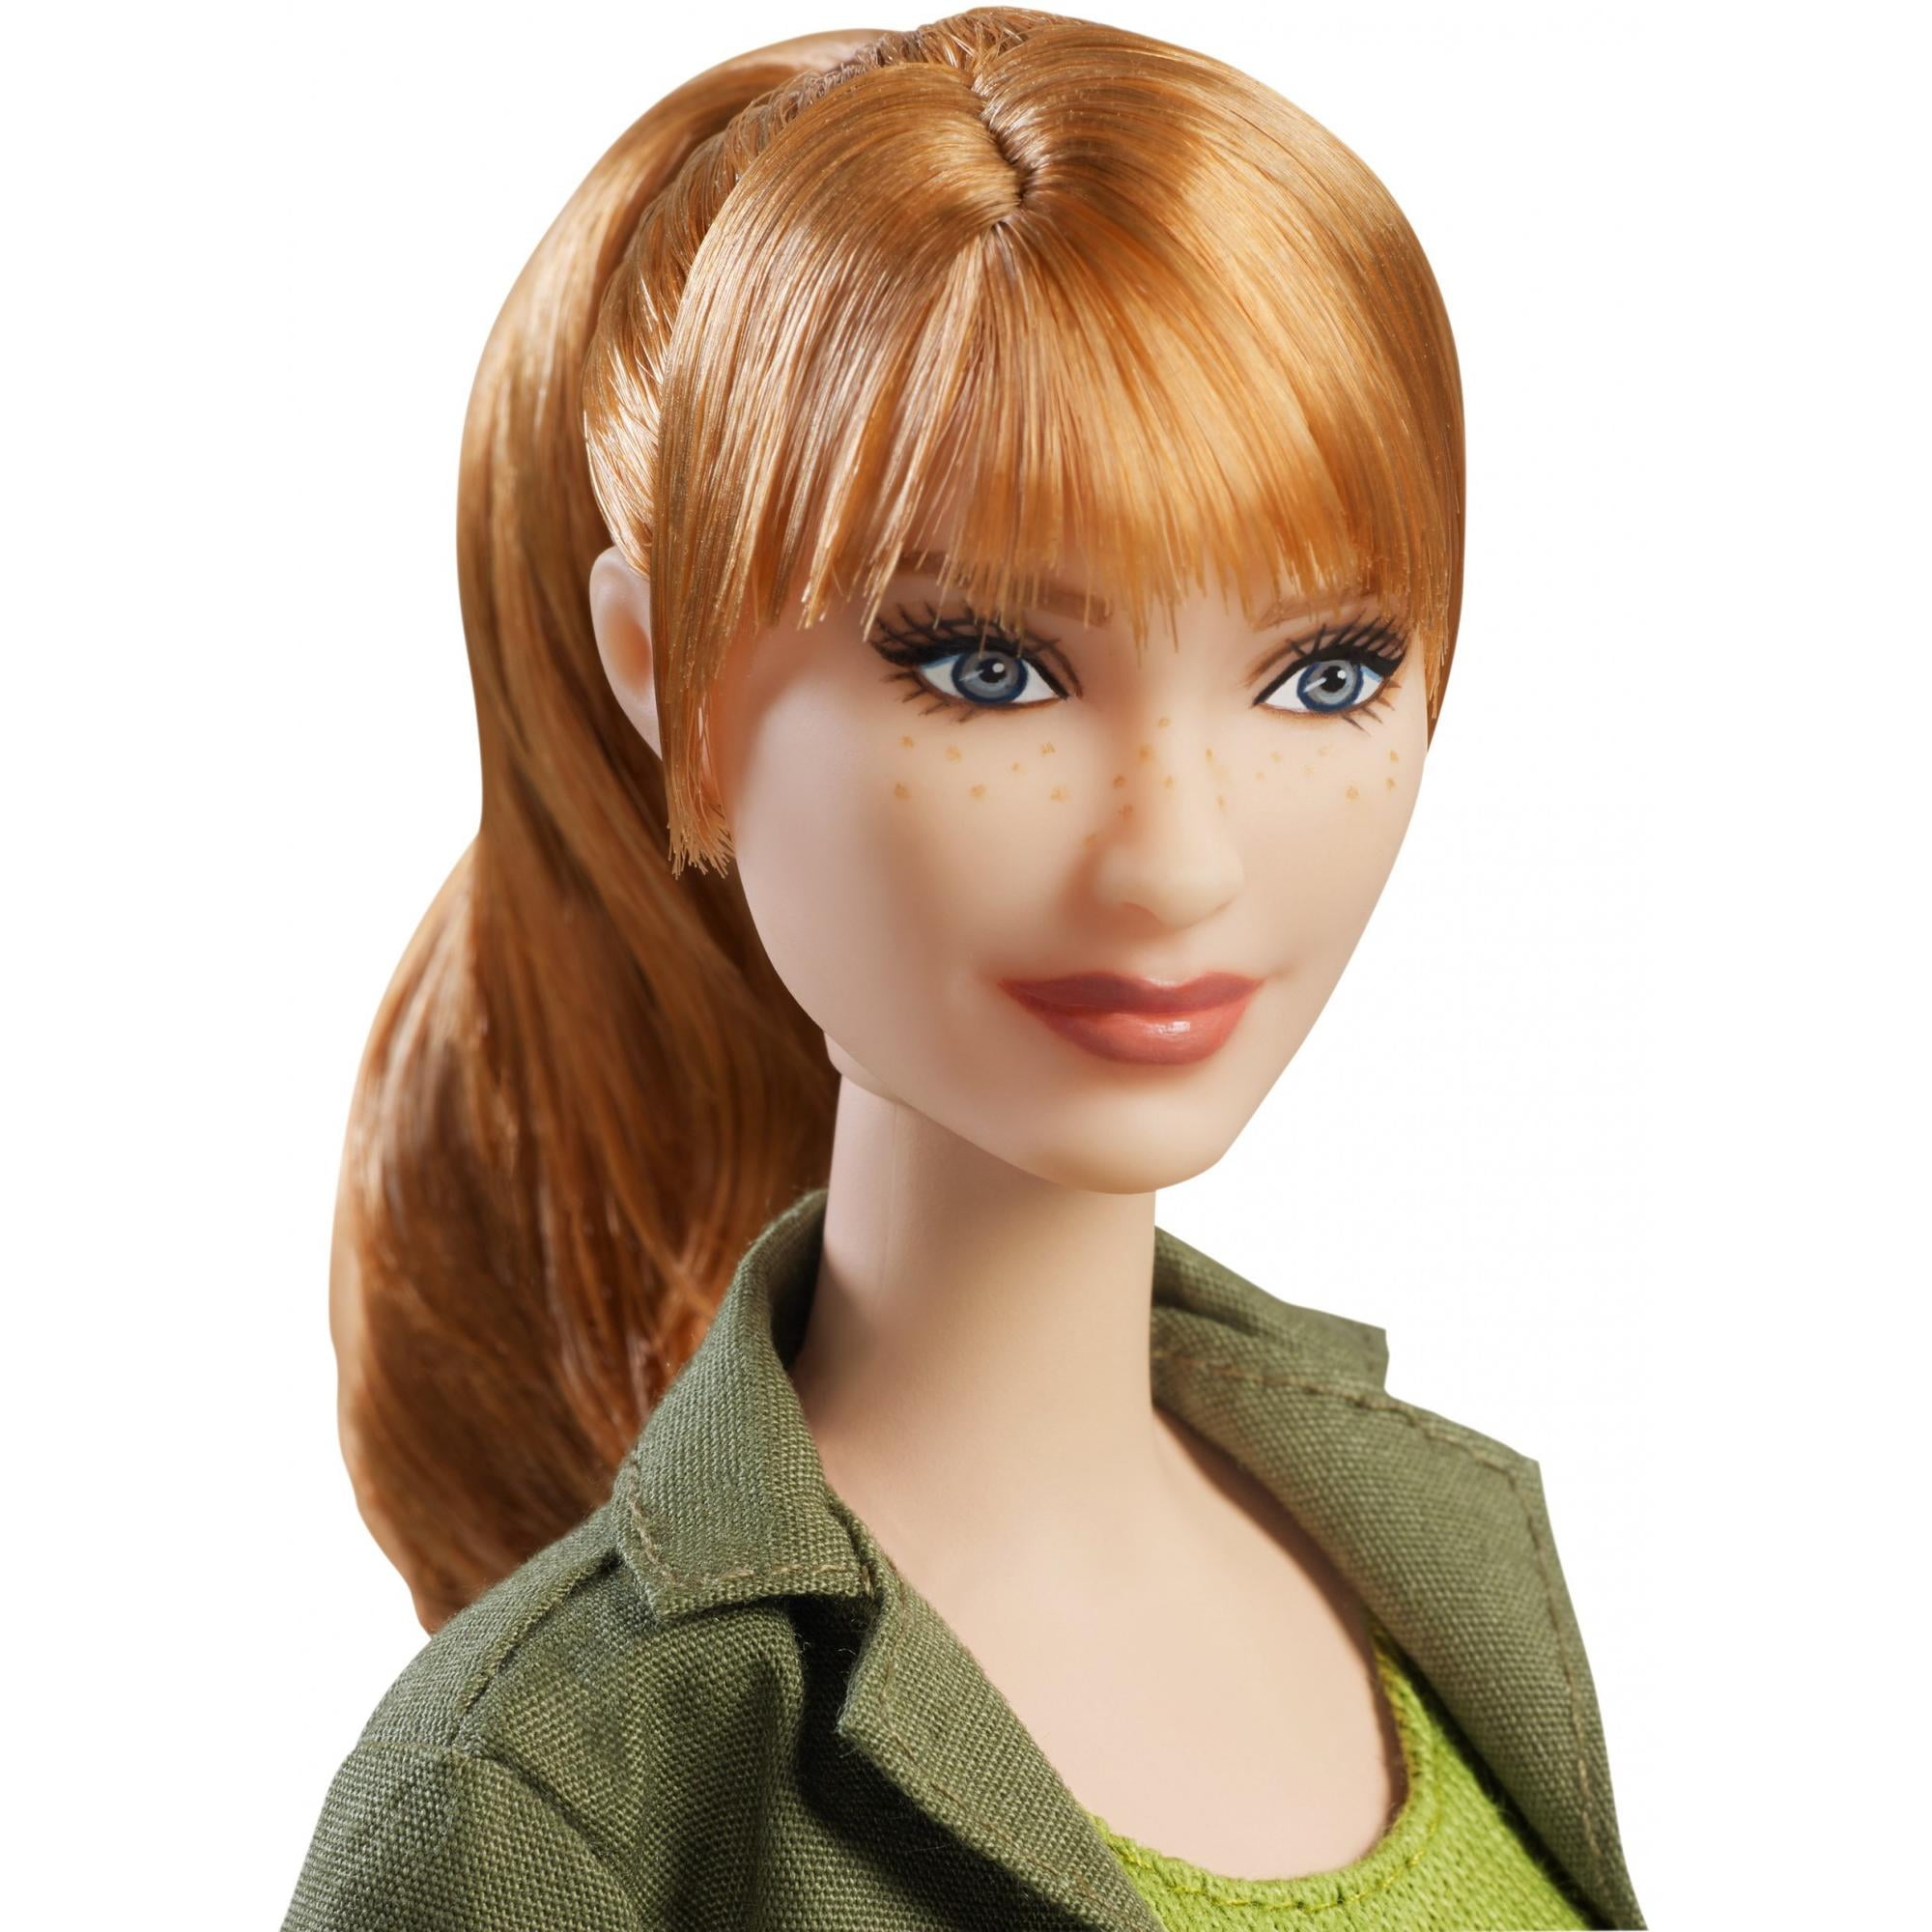 Barbie Jurassic W Orld Claire Doll W Earing Movie-Inspired Look 